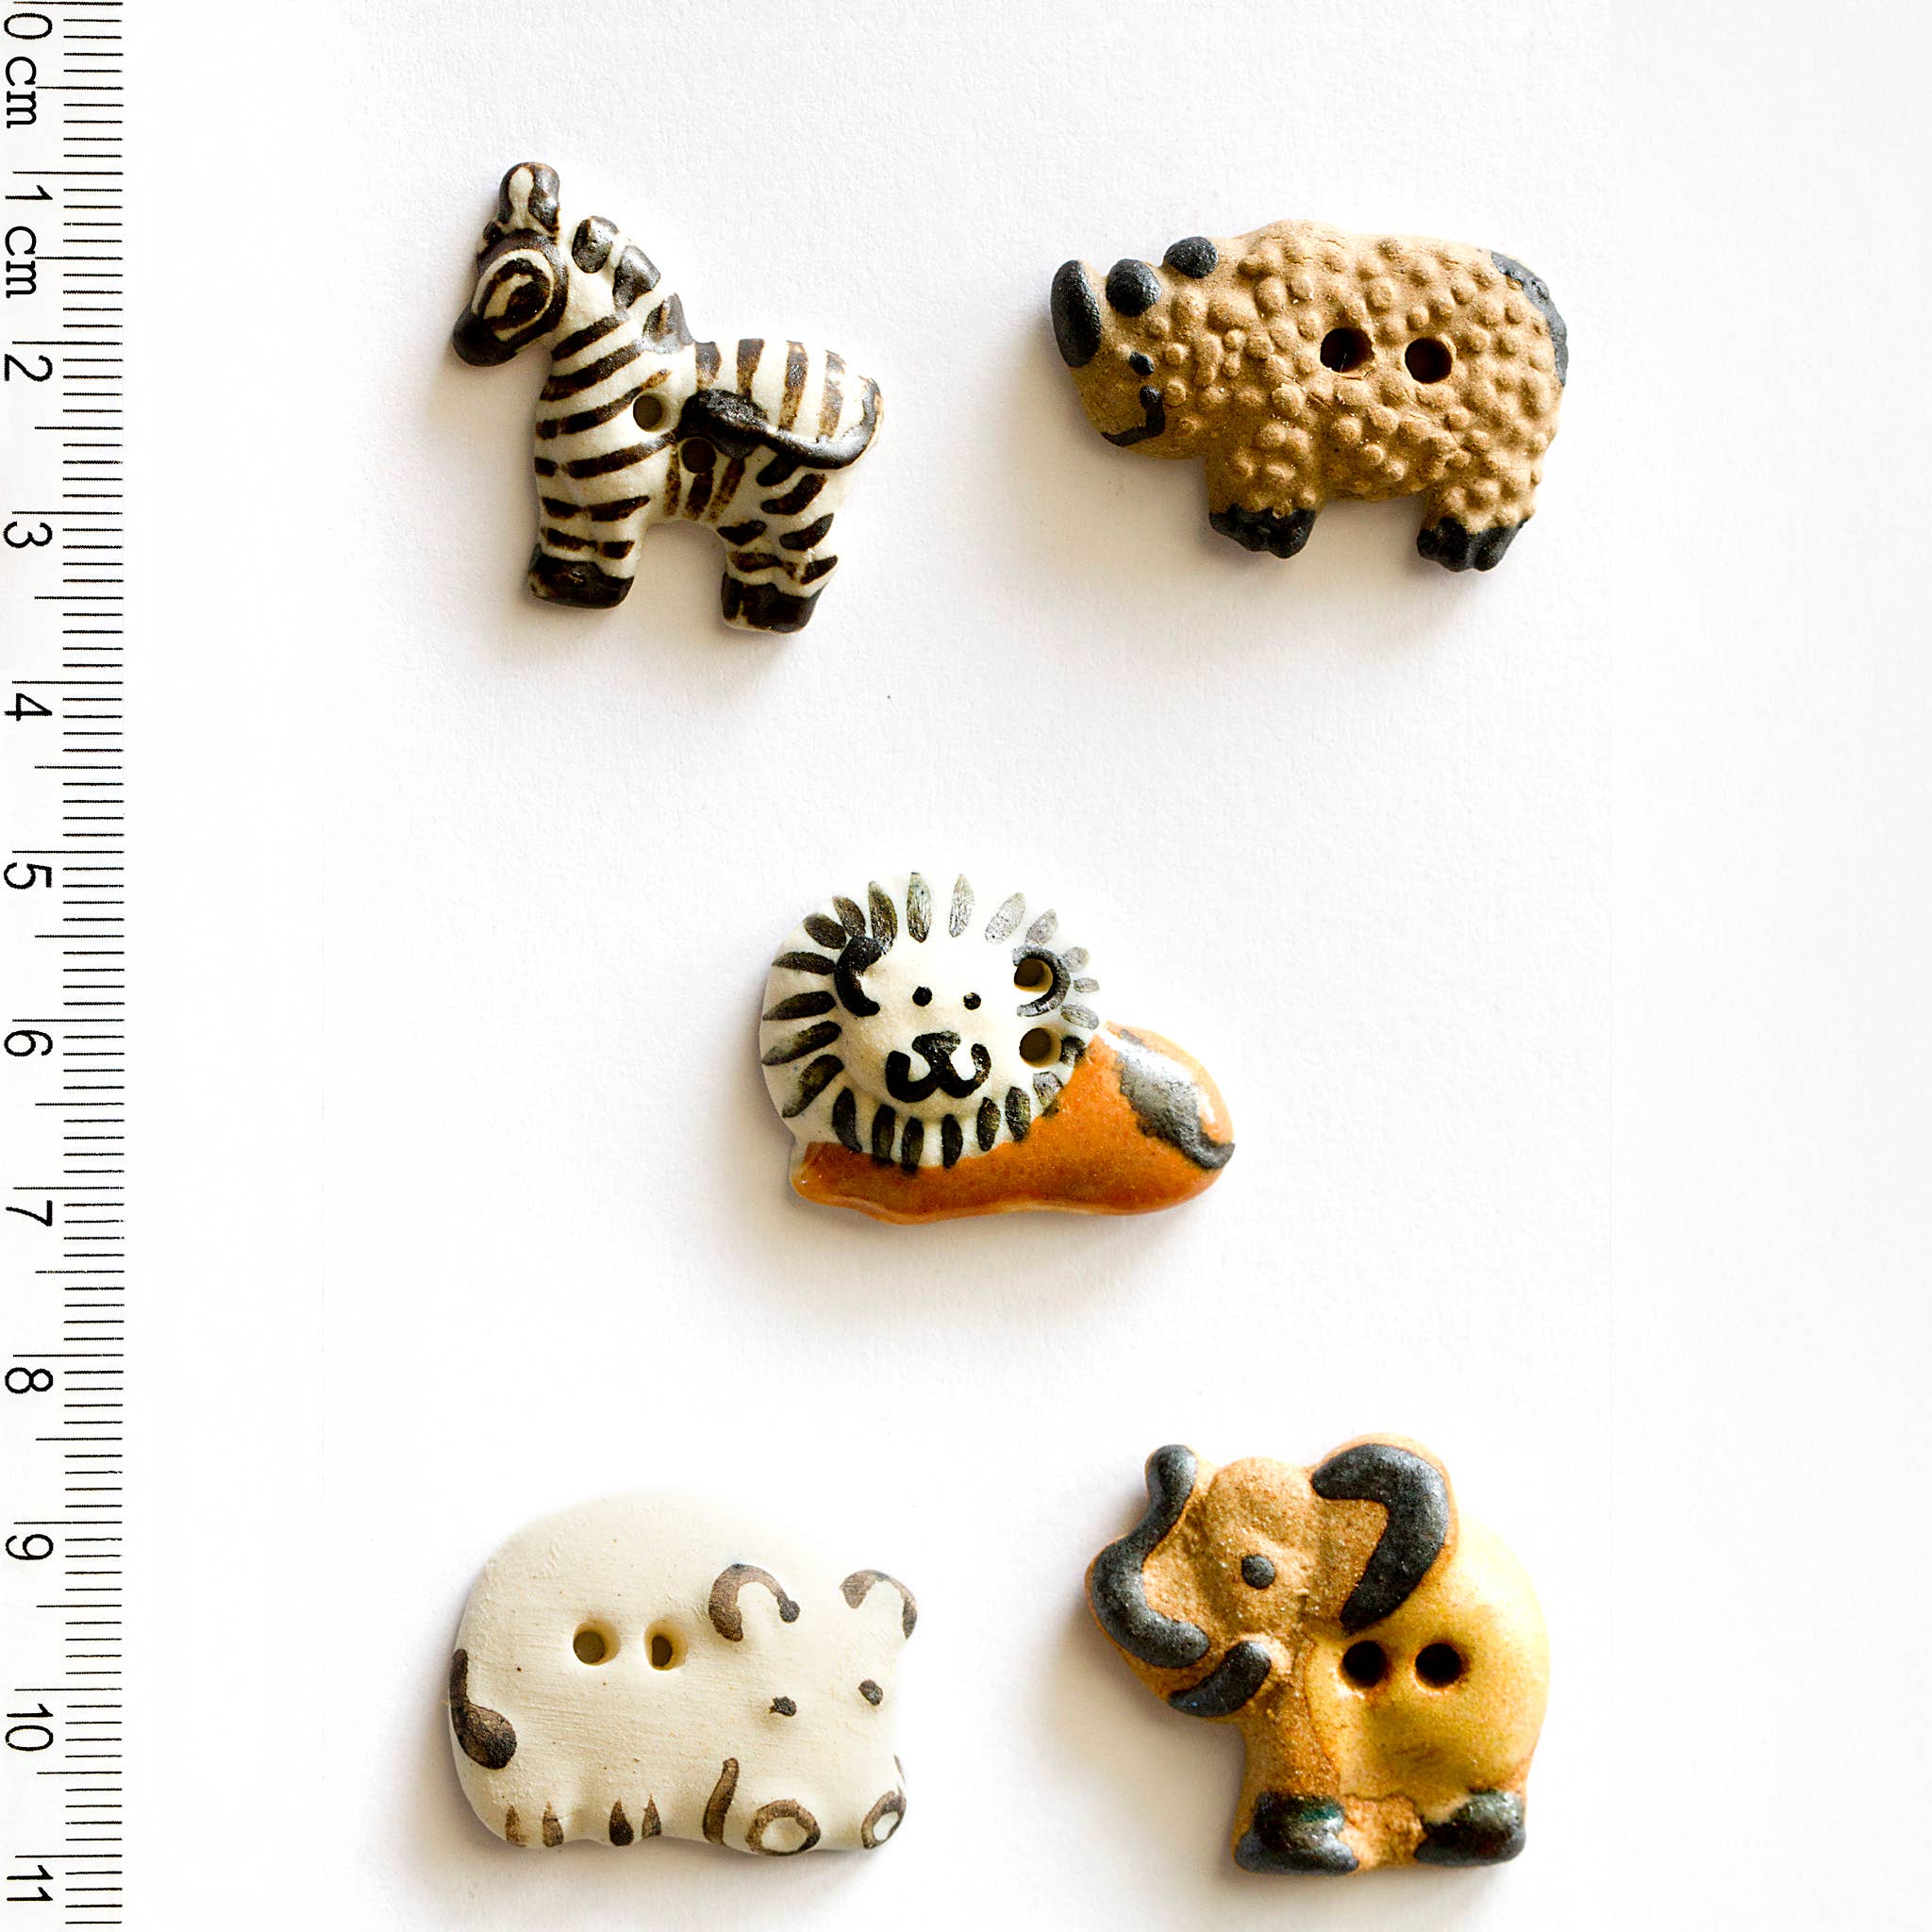 Incomparable Buttons - 5 African Animal Buttons